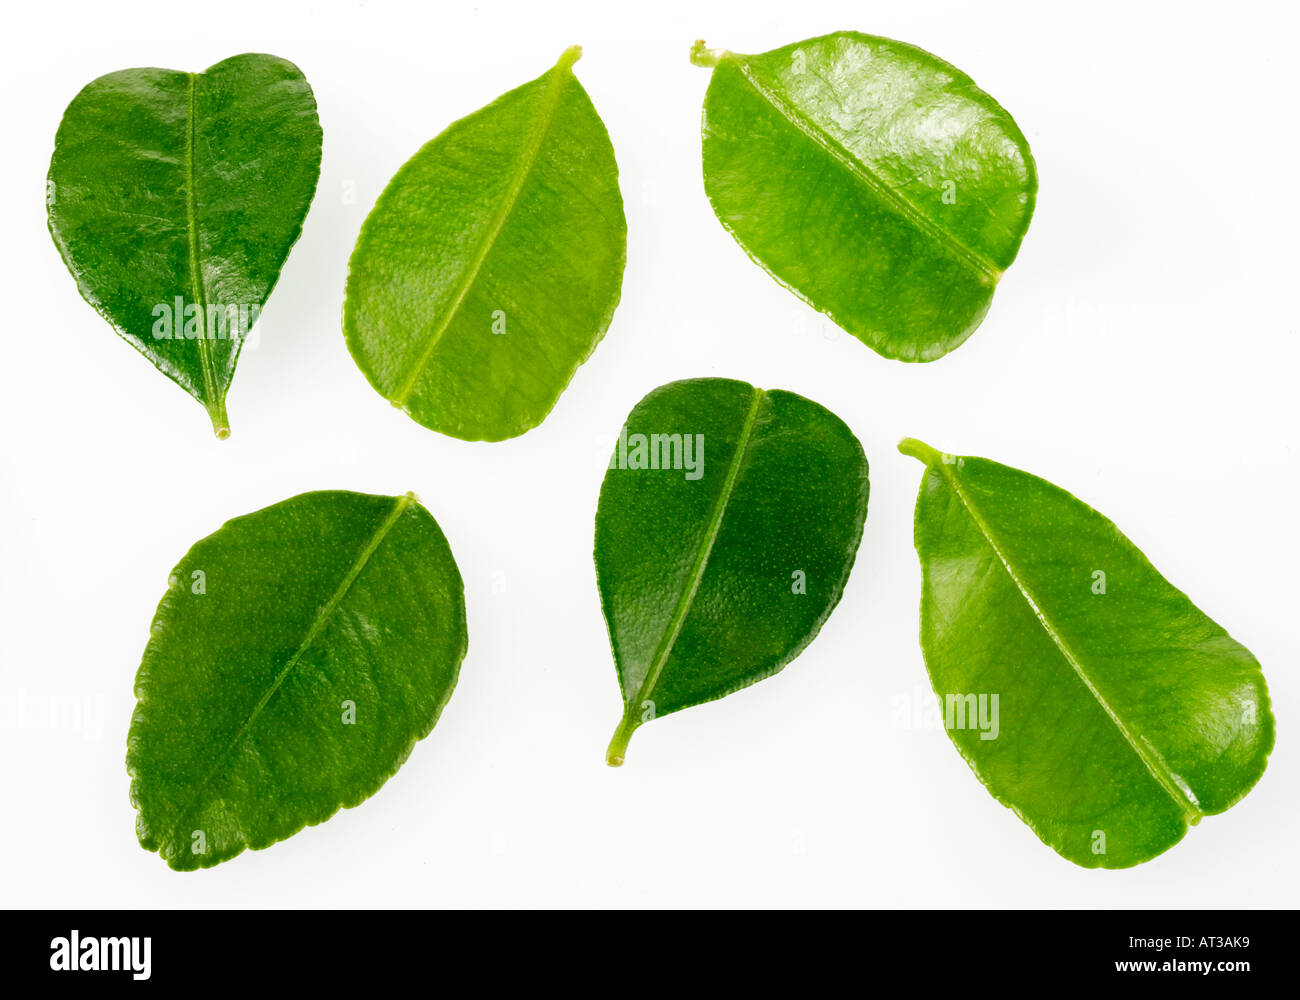 Thai Lime Leaves Kaffir Lime Leaves Cut Out Stock Photo Alamy,How To Keep Cats Away From Your Property